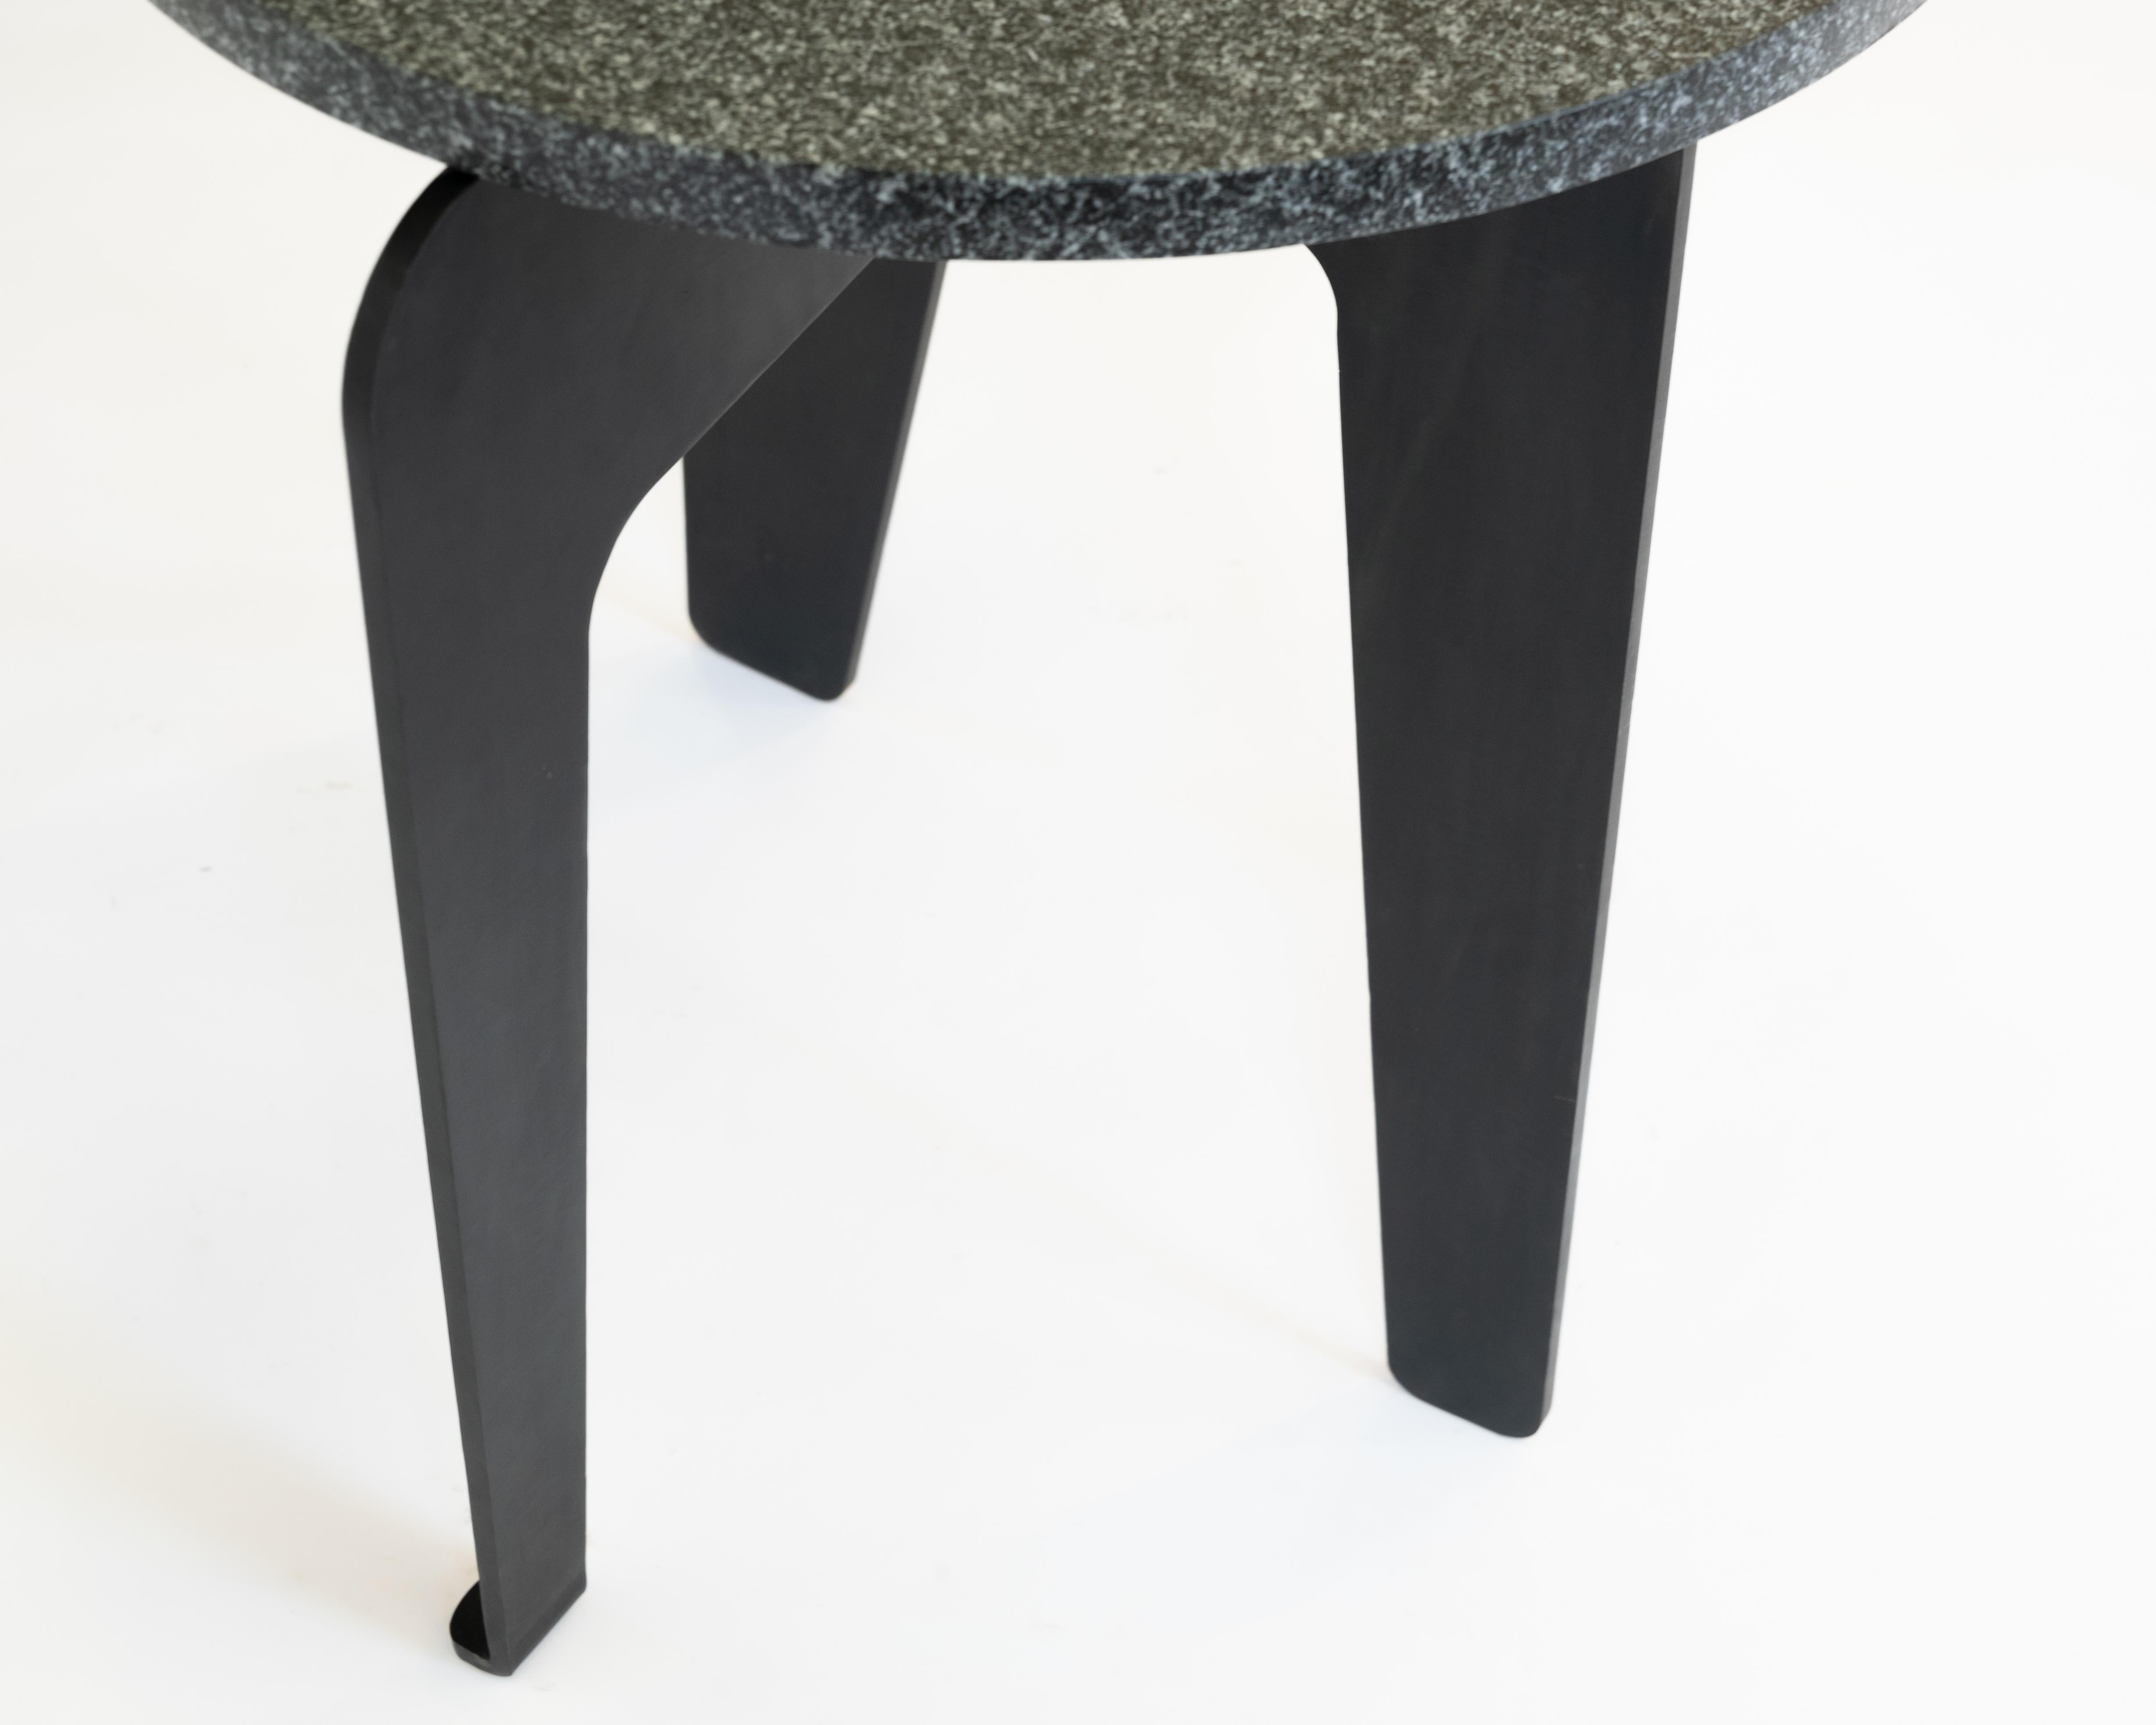 TABLE NO. 6
J.M. Szymanski
d. 2021

Inspired by Calder, hydraulic bent, 3/8” thick, steel plates are combined to support a
1-1/4” thick stone top.

Custom sizes available. Made in the Bronx, New York, USA

Our products are fabricated and